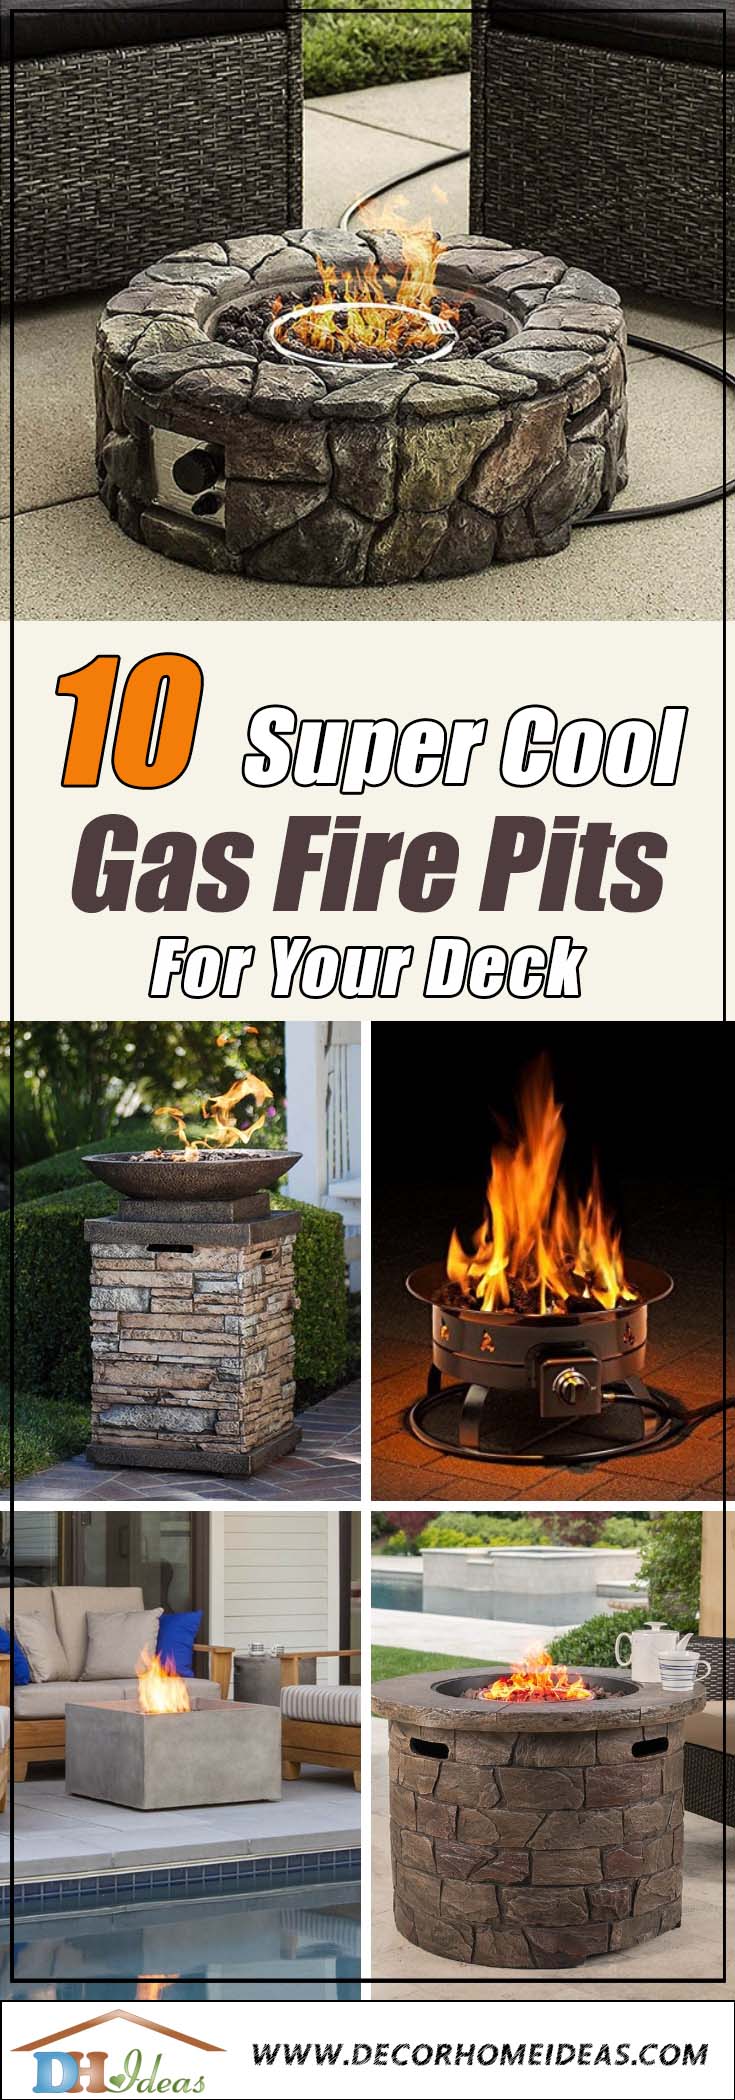 10 Best Gas Fire Pits For Deck In 2021, Is It Safe To Put Gas Fire Pit On Deck